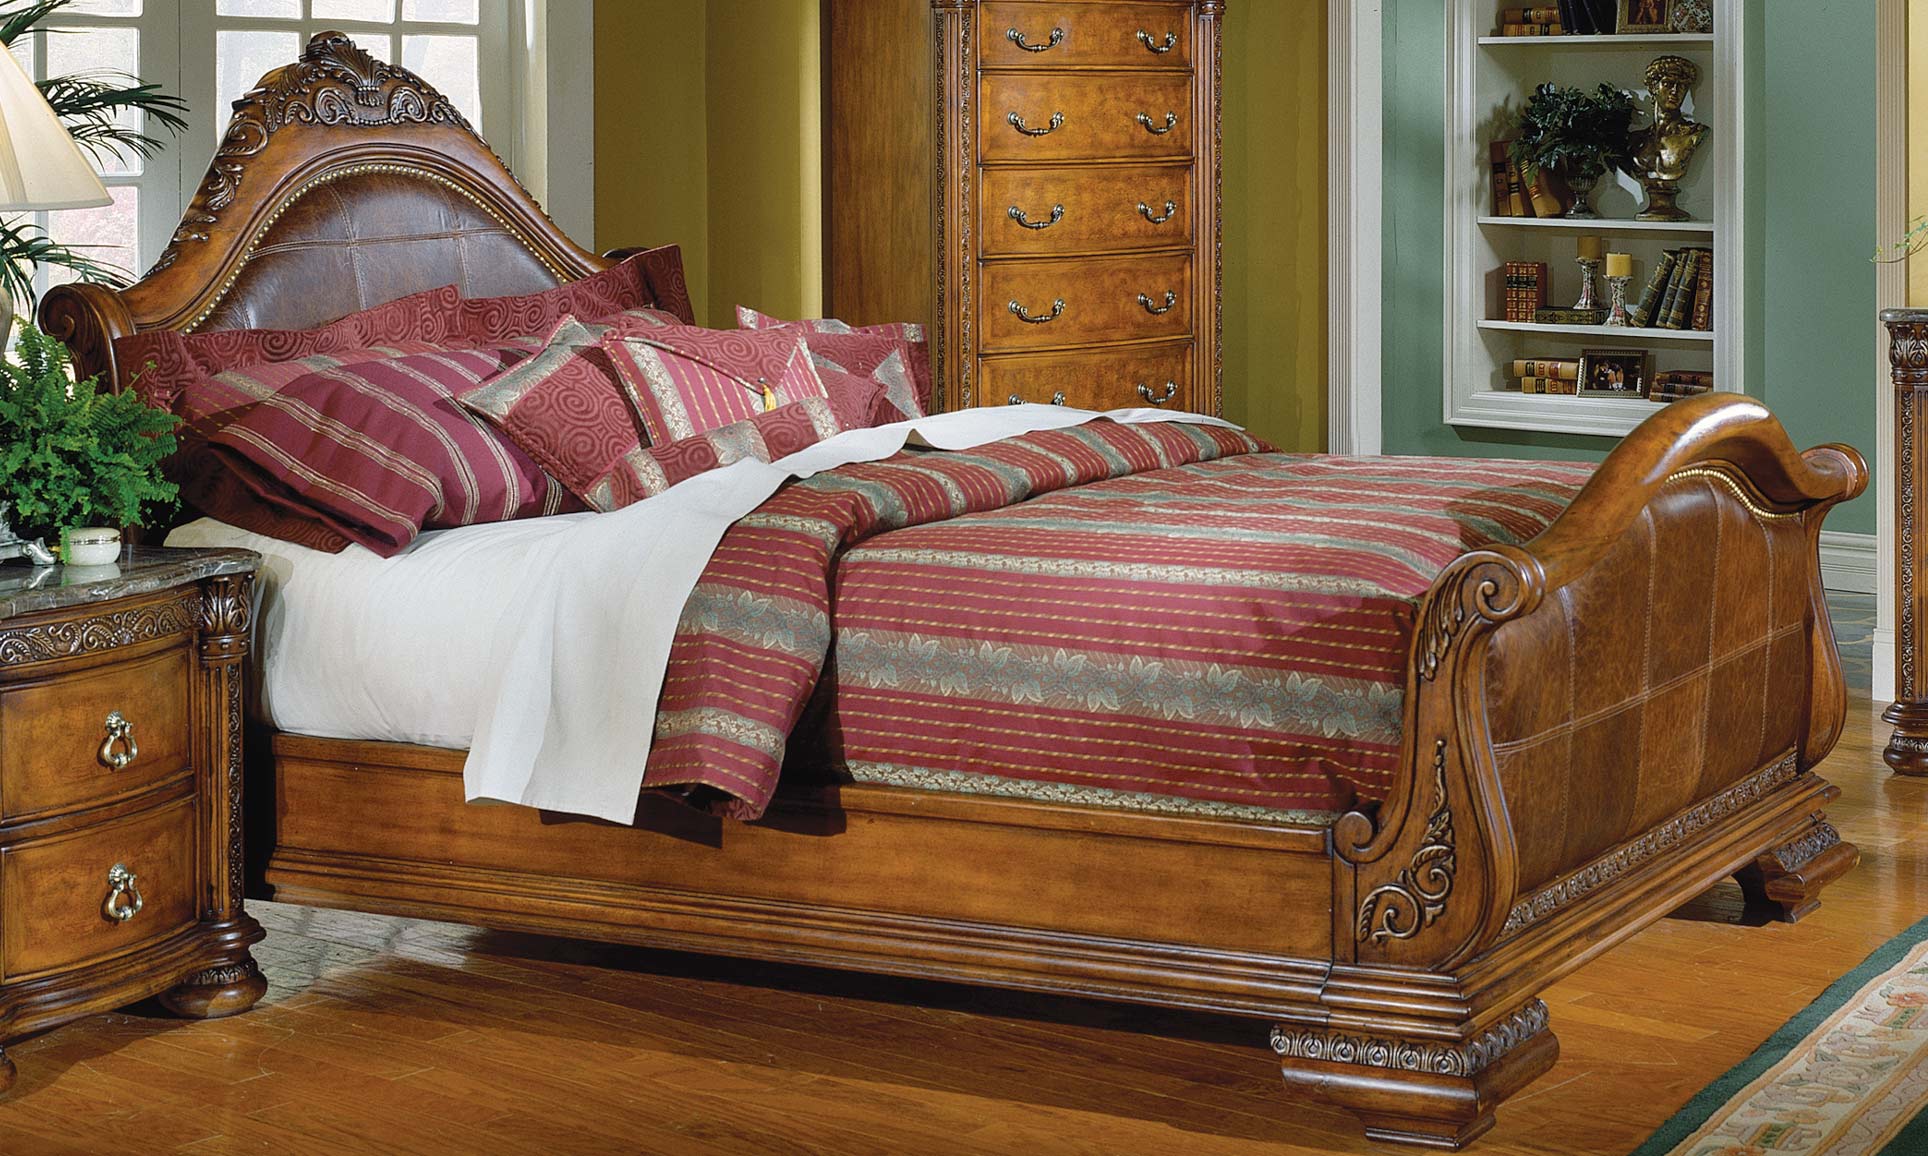 Homelegance Spanish Hills Sleigh Bed with Leather